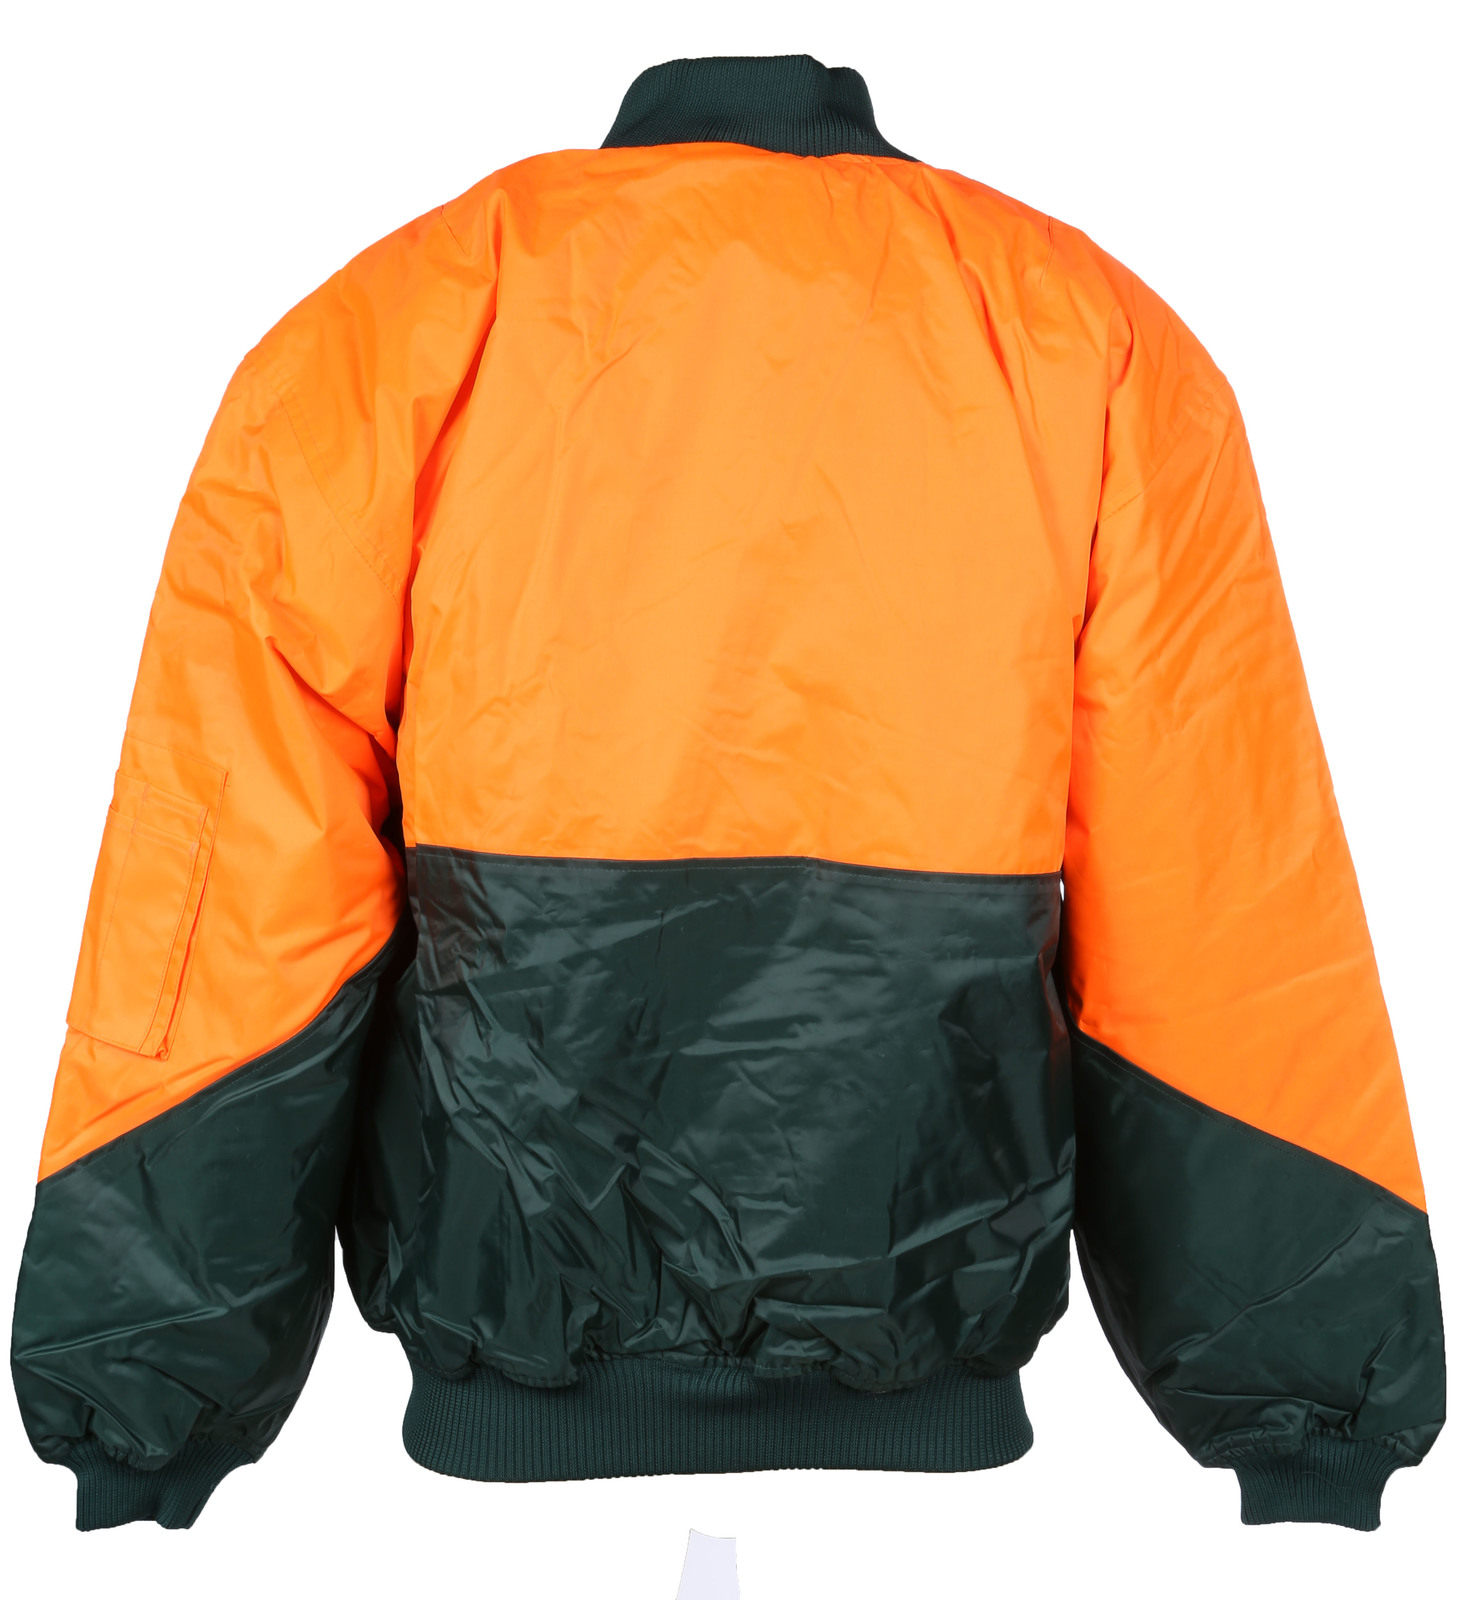 OUTDOOR WORLD Flying Jacket with Elasticated Cuffs. Orange-Green Colour ...